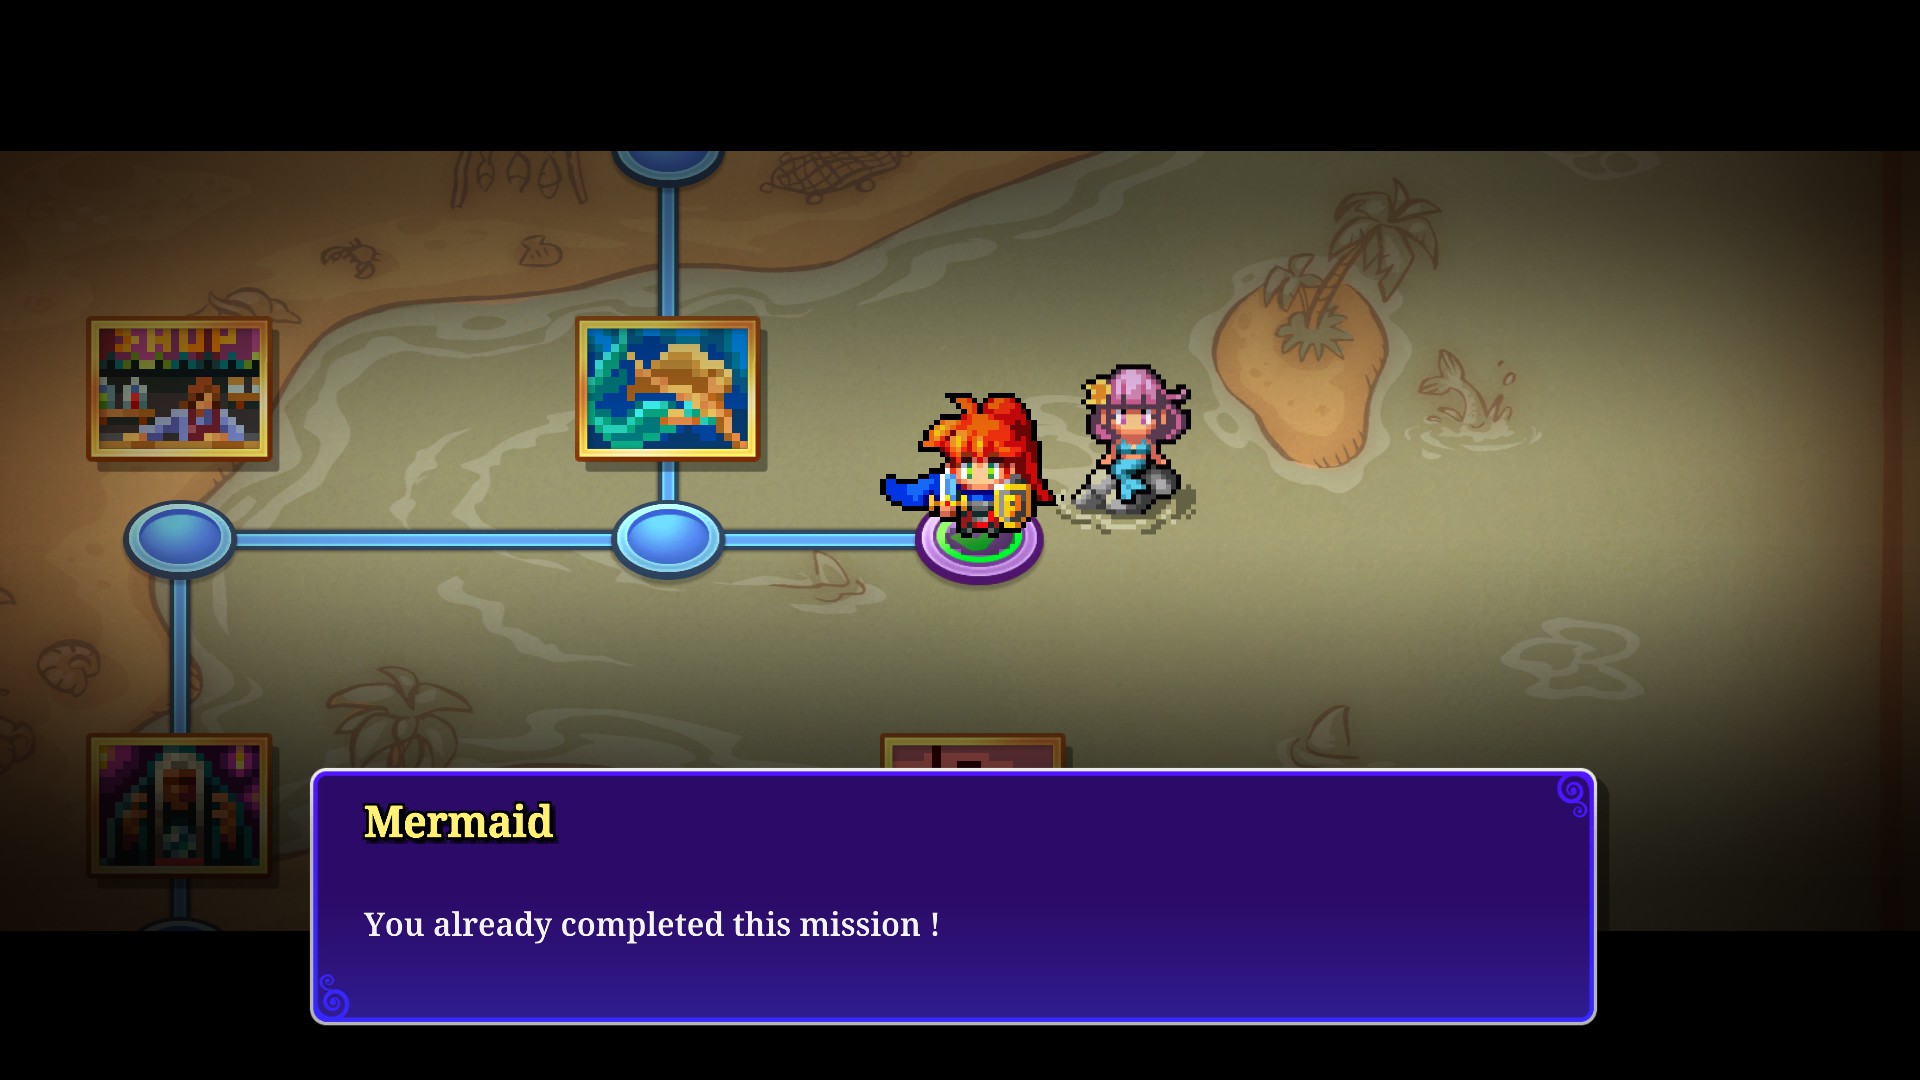 Screenshot from PictoQuest showing the 'world map' puzzle select screen. The player is talking to a Mermaid npc, whose dialogue reads: You already completed this mission!